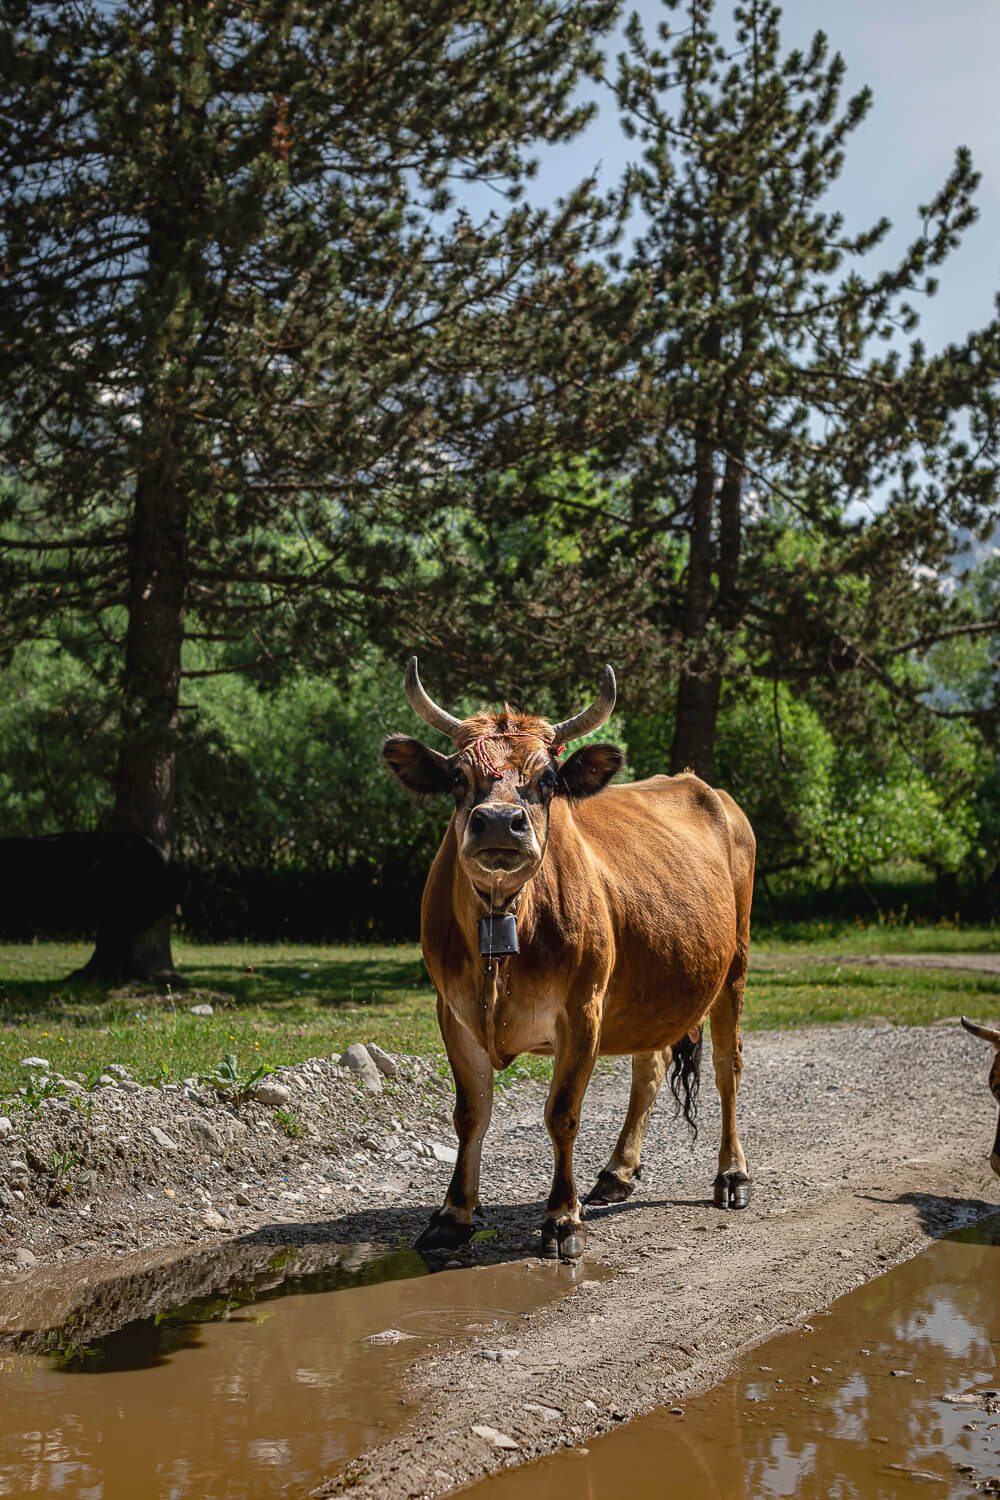 Cow on the Valbona Theth Trail